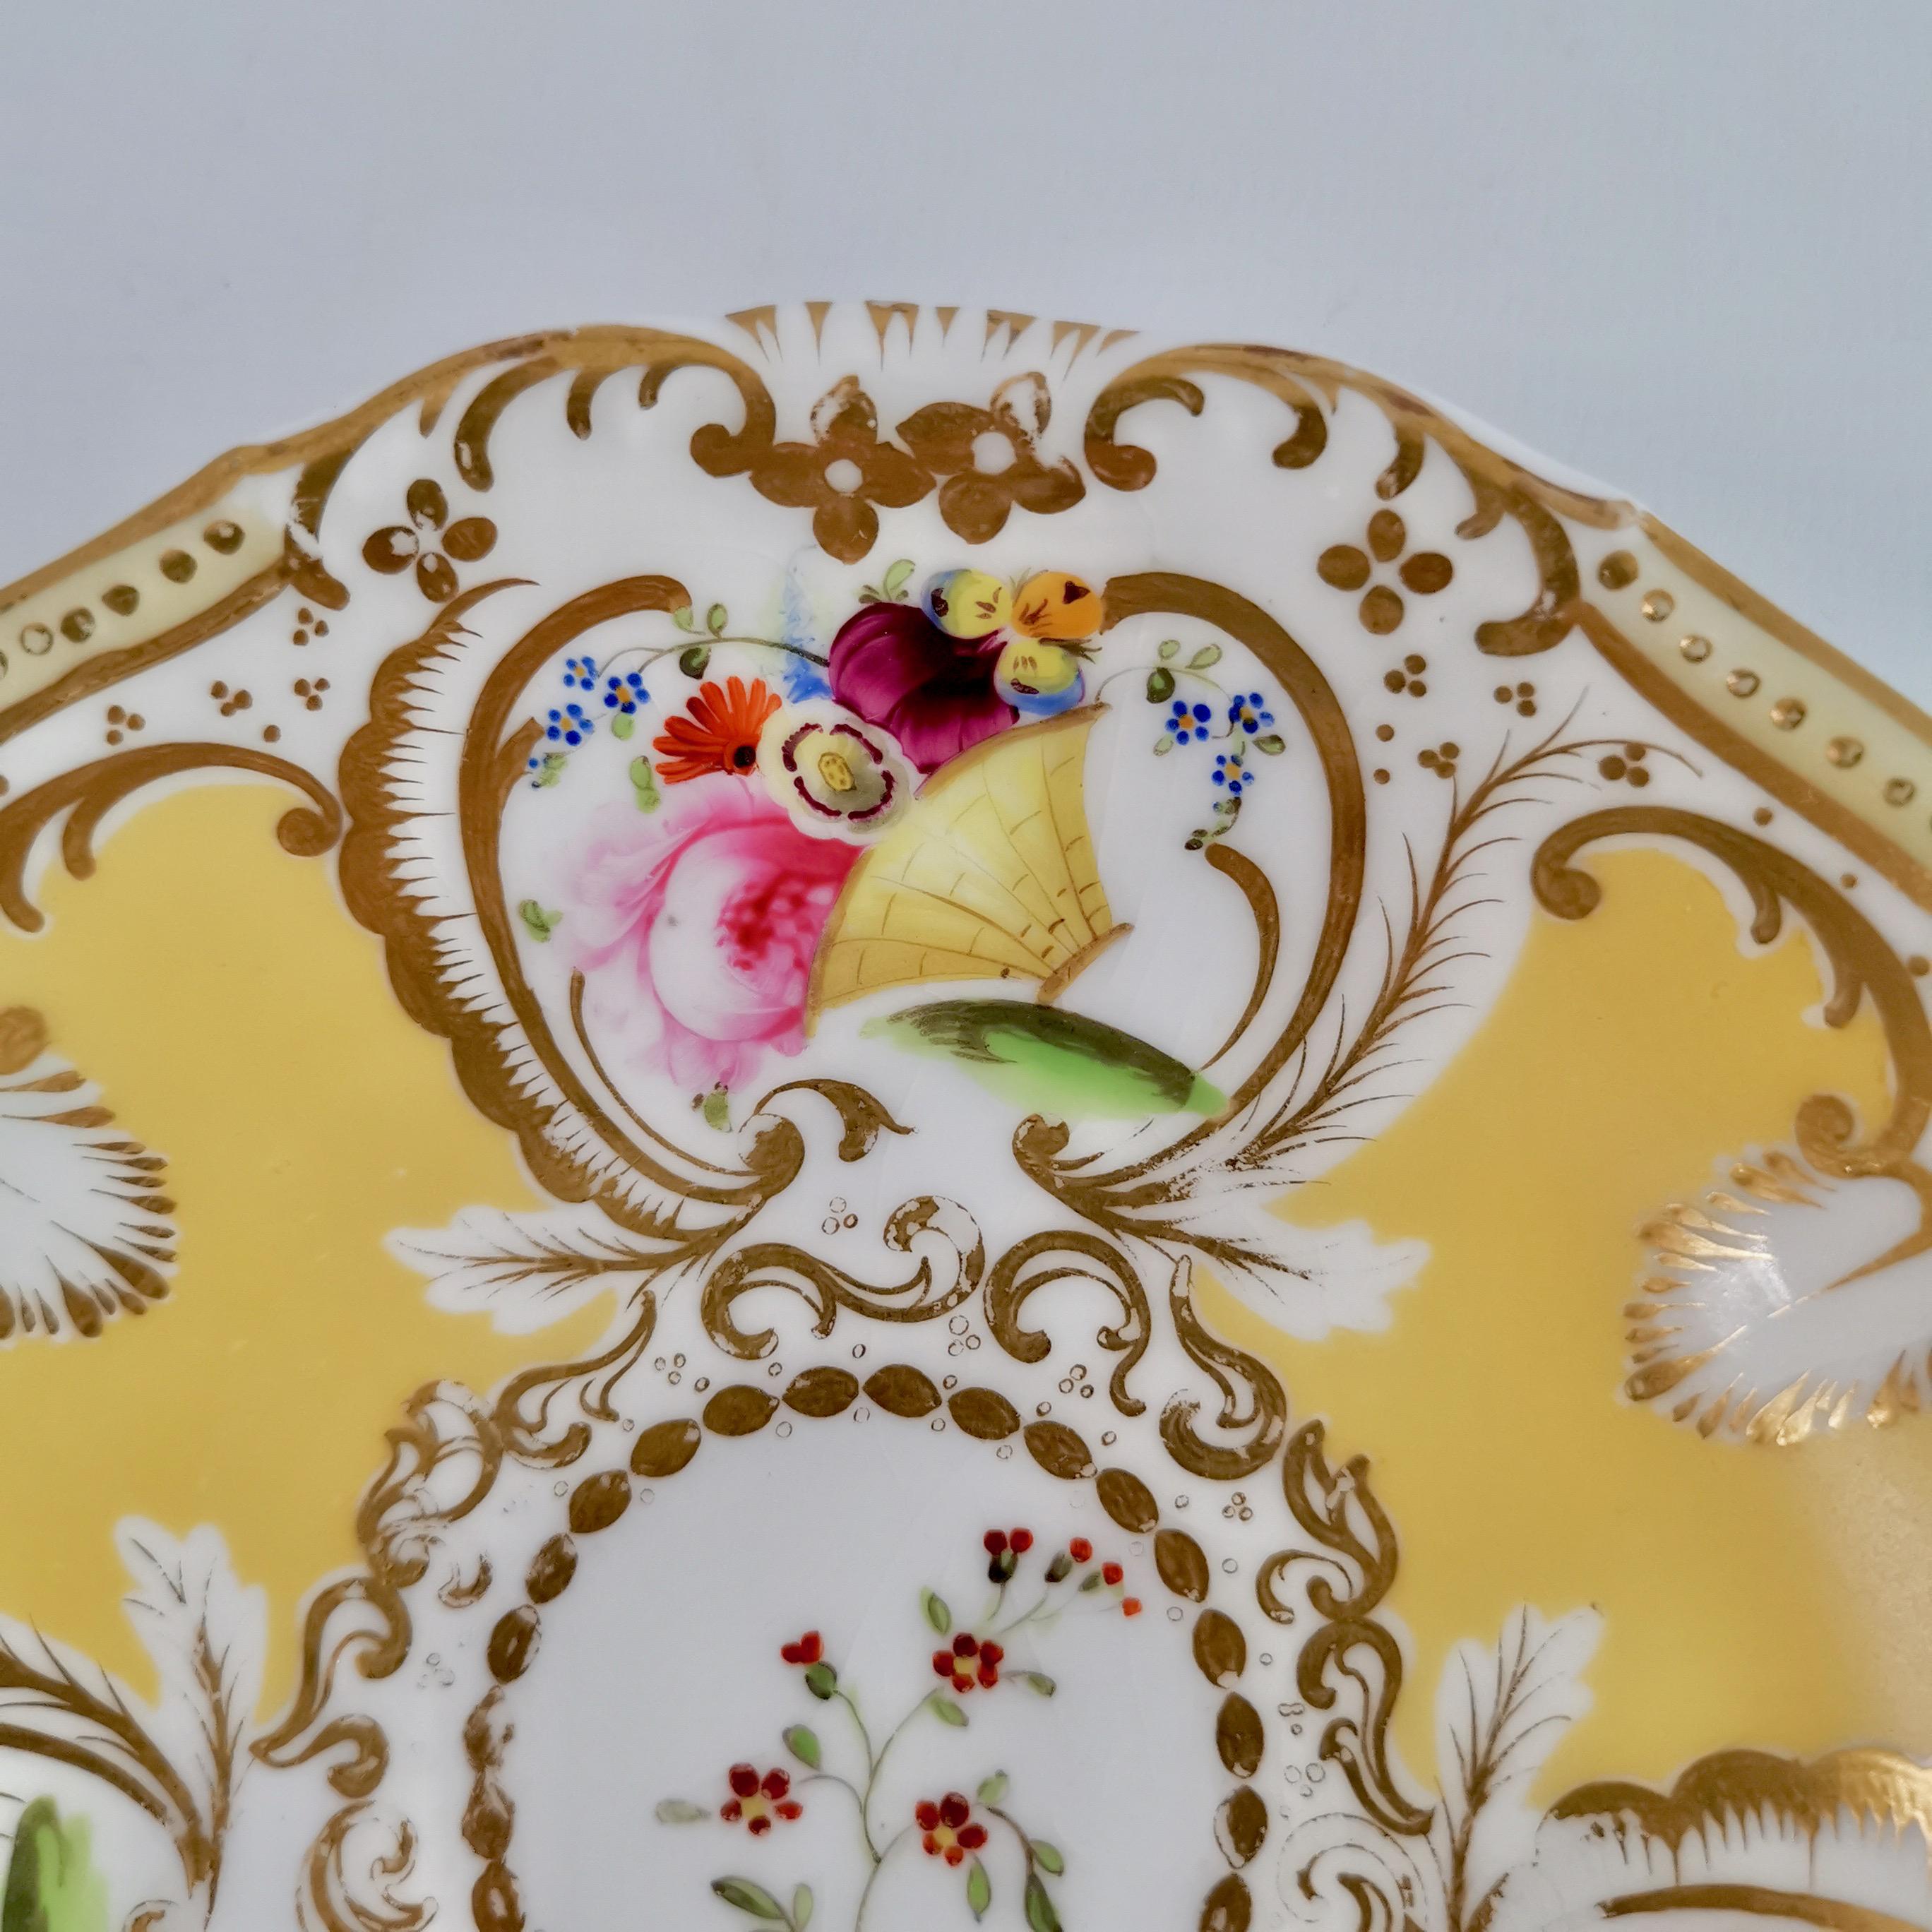 Grainger Worcester Teacup, Yellow, Gilt and Flowers, Rococo Revival, circa 1835 3